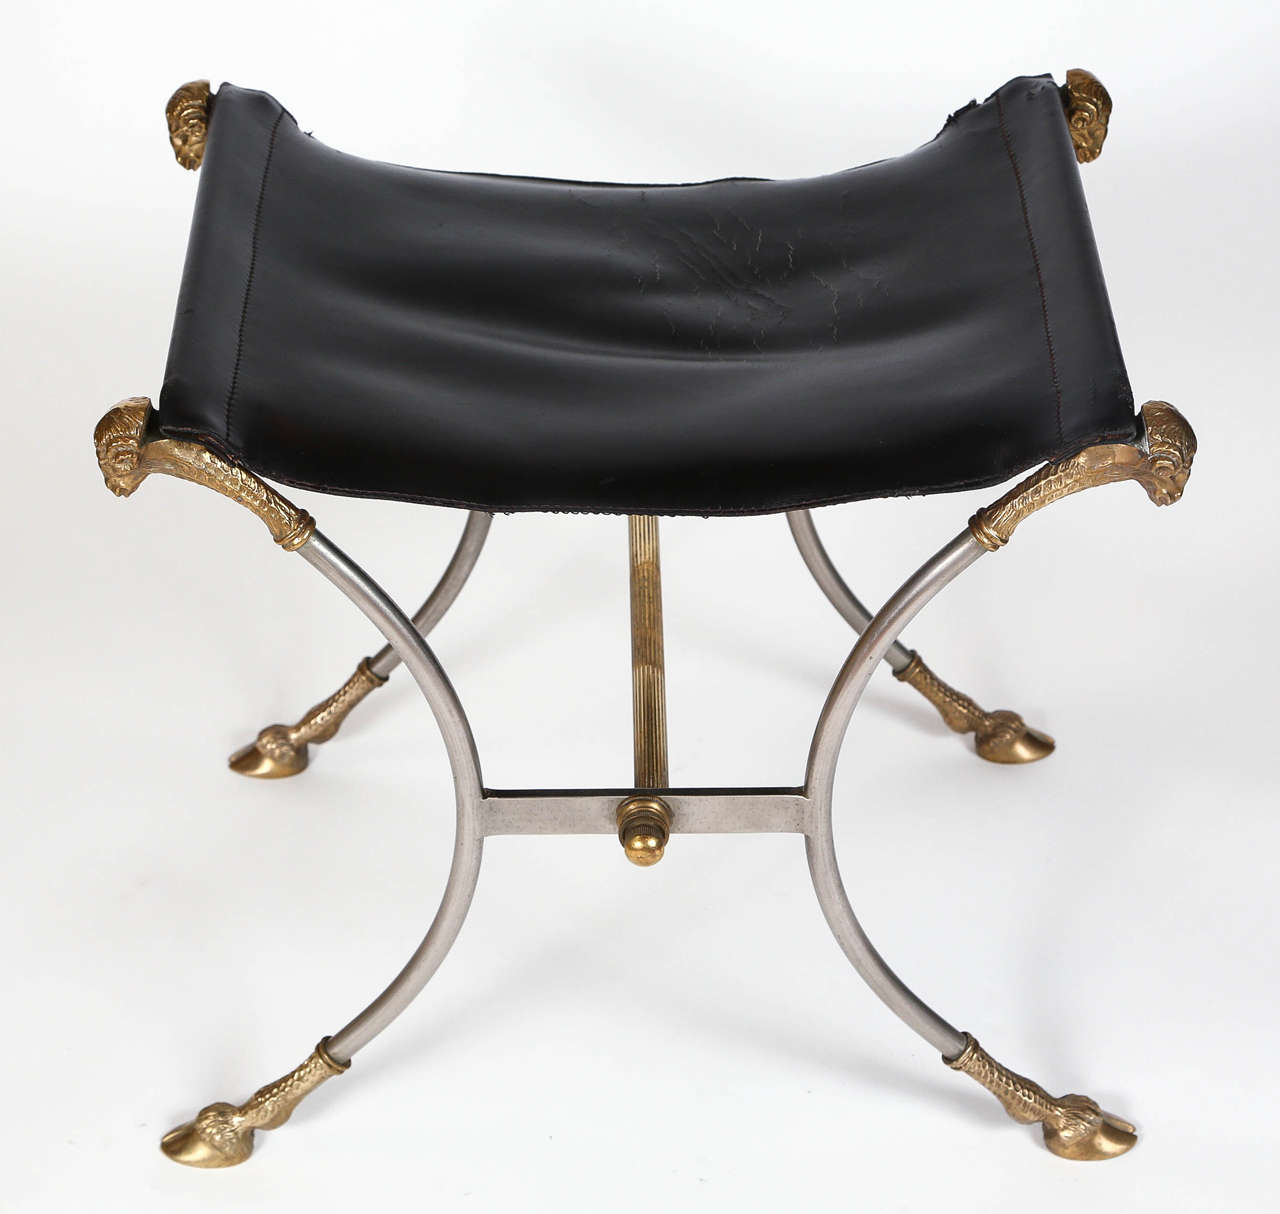 Pair of vintage Italian steel neoclassical stool in the style of Maison Jansen. Features black leather seat with brass ram's head and hoof detailing. Two available. Sold separately.